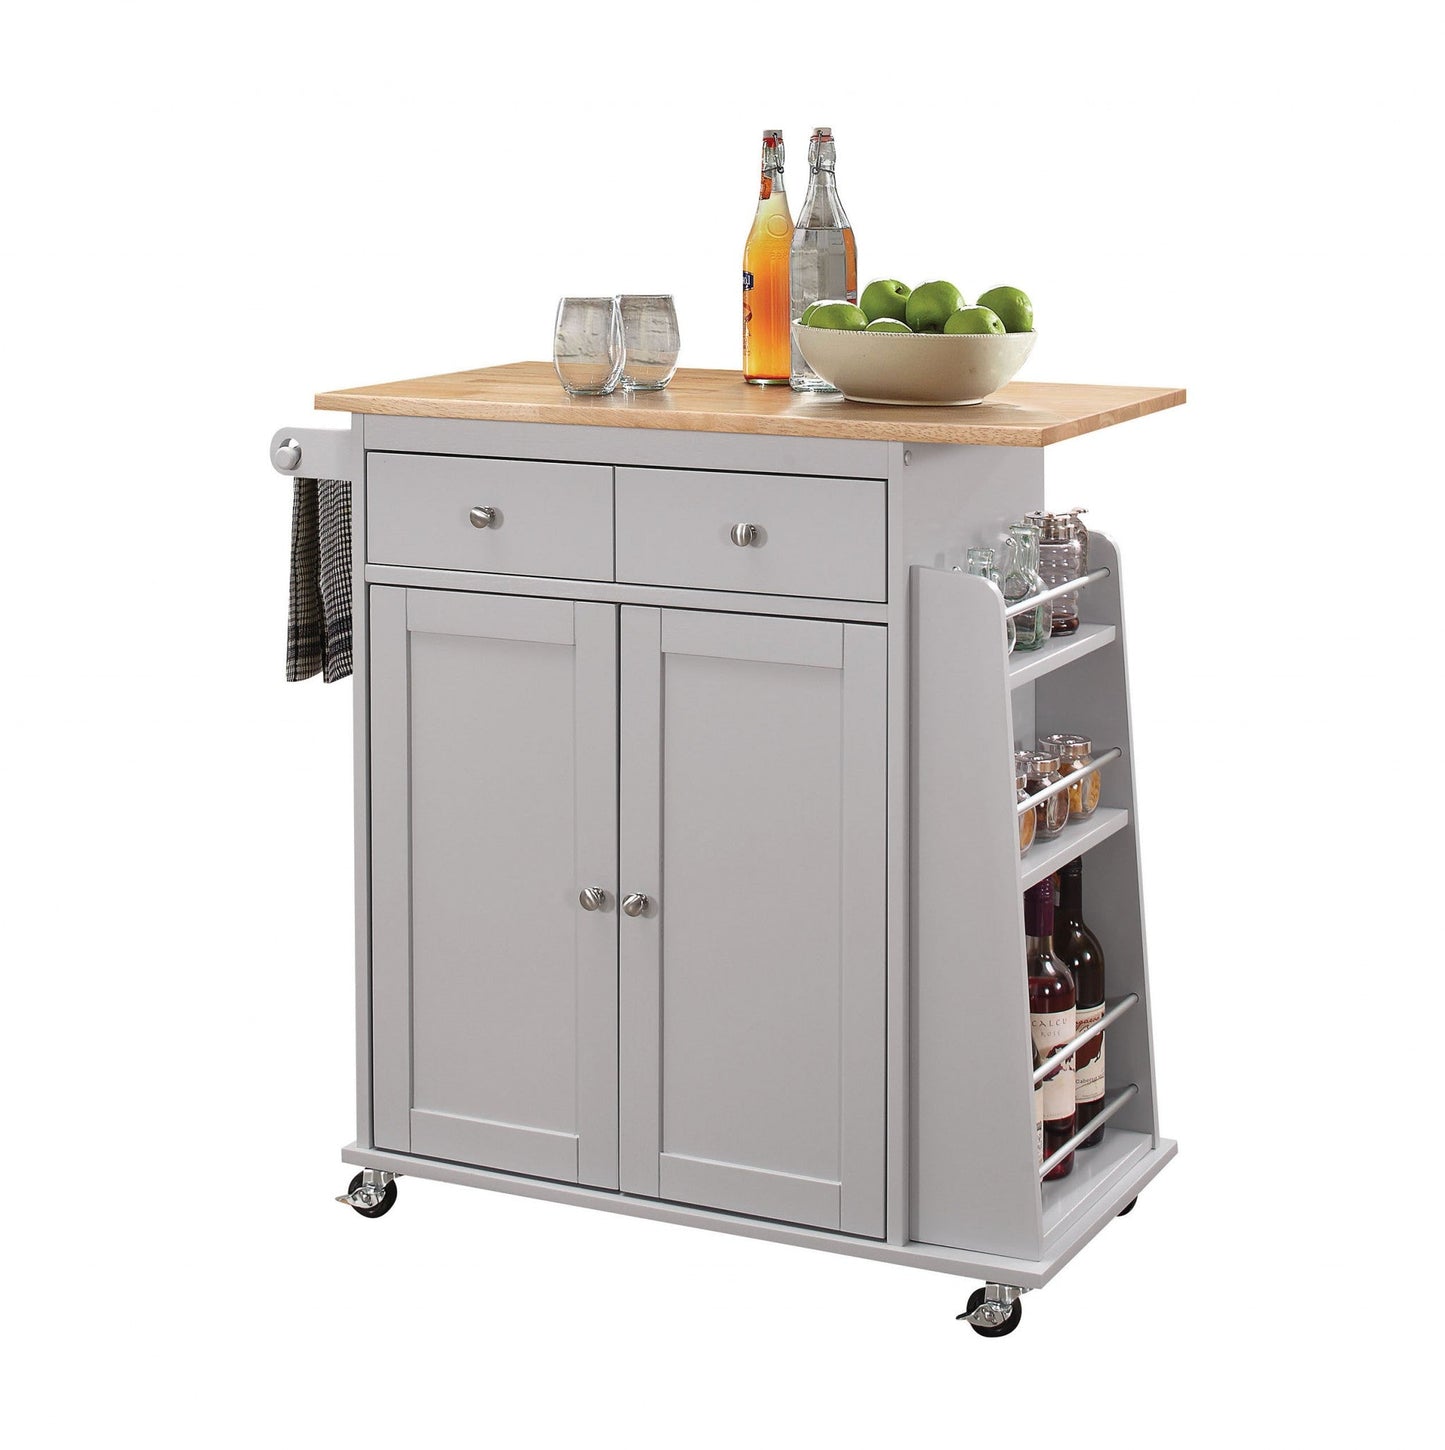 35inches X 18inches X 34inches Natural And Gray Rubber Wood Kitchen